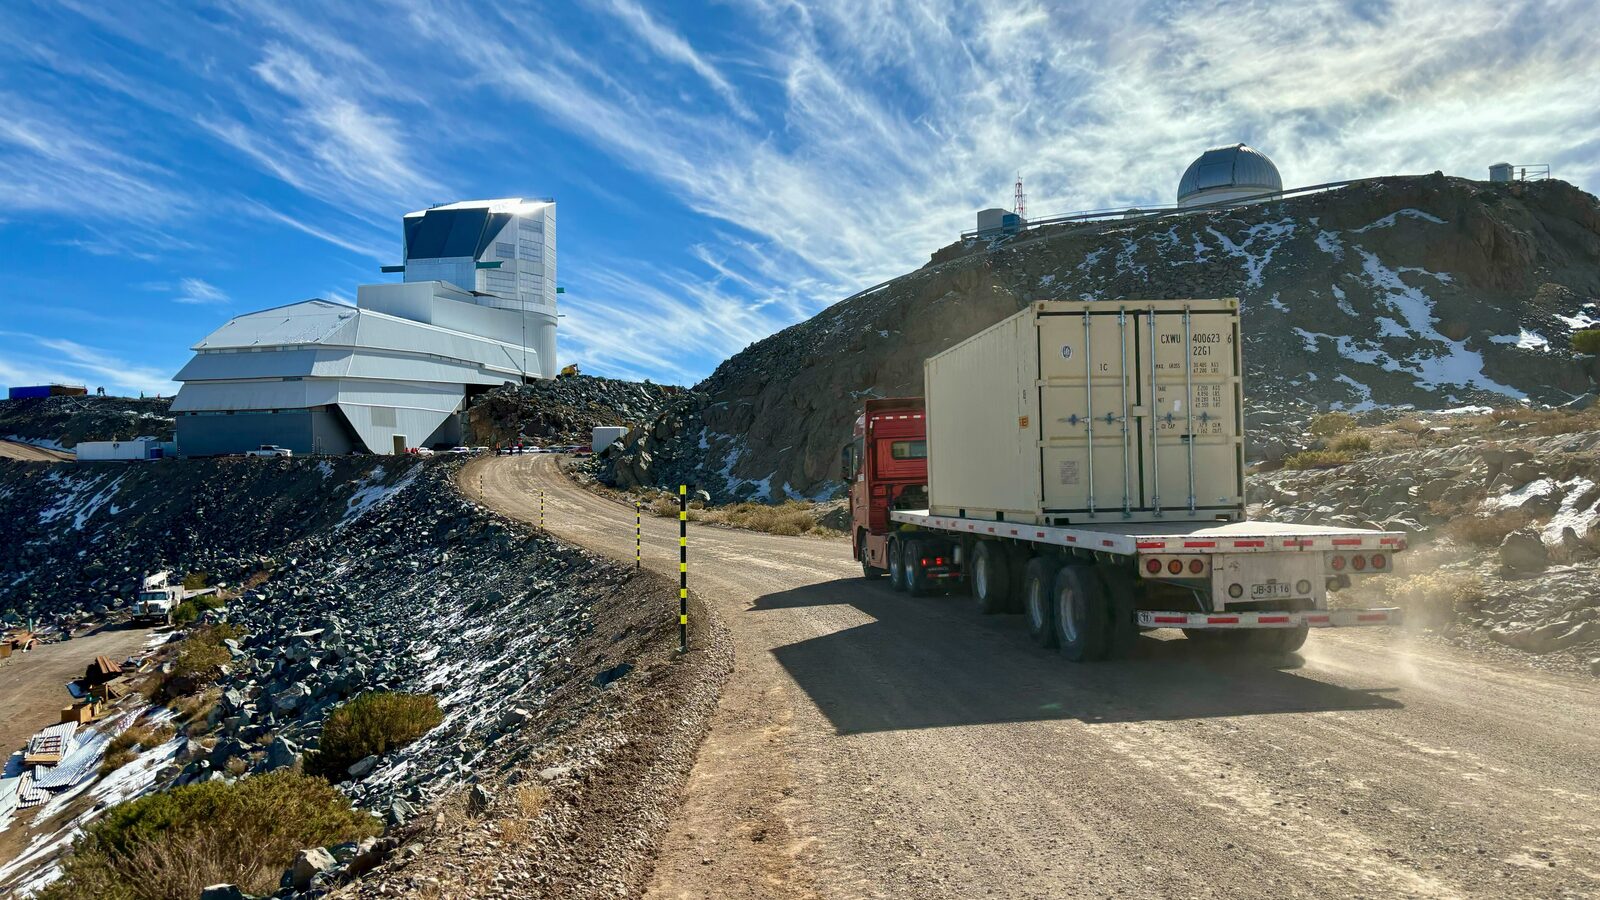 The shipping crate holding the LSST Camera is transported the final 35 kilometers (21.7 miles) up the winding dirt road to the observatory on the summit of Cerro Pachón.